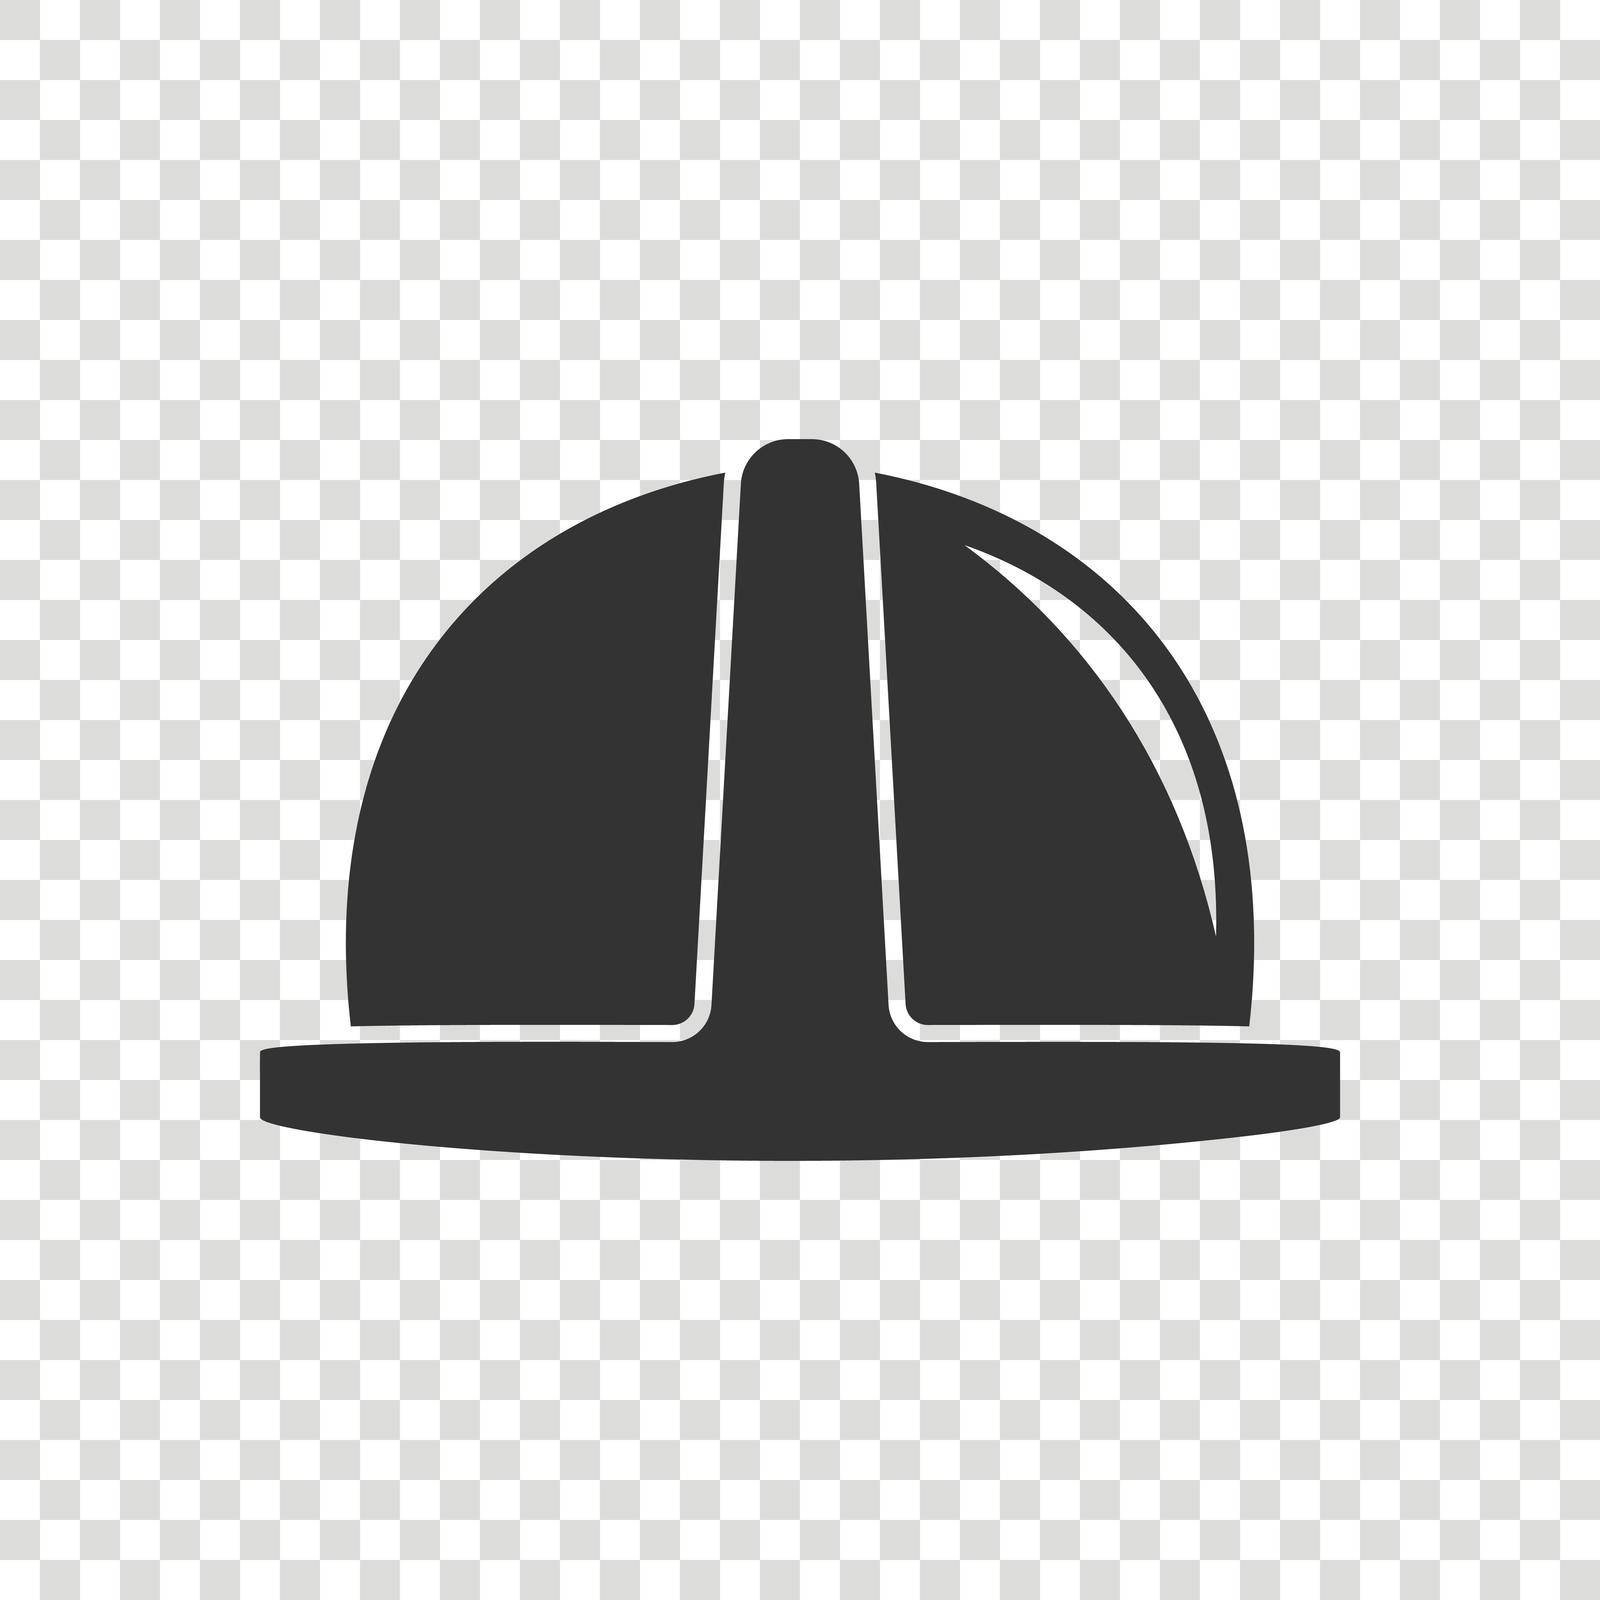 Construction helmet icon in flat style. Safety cap vector illustration on isolated background. Worker hat sign business concept. by LysenkoA